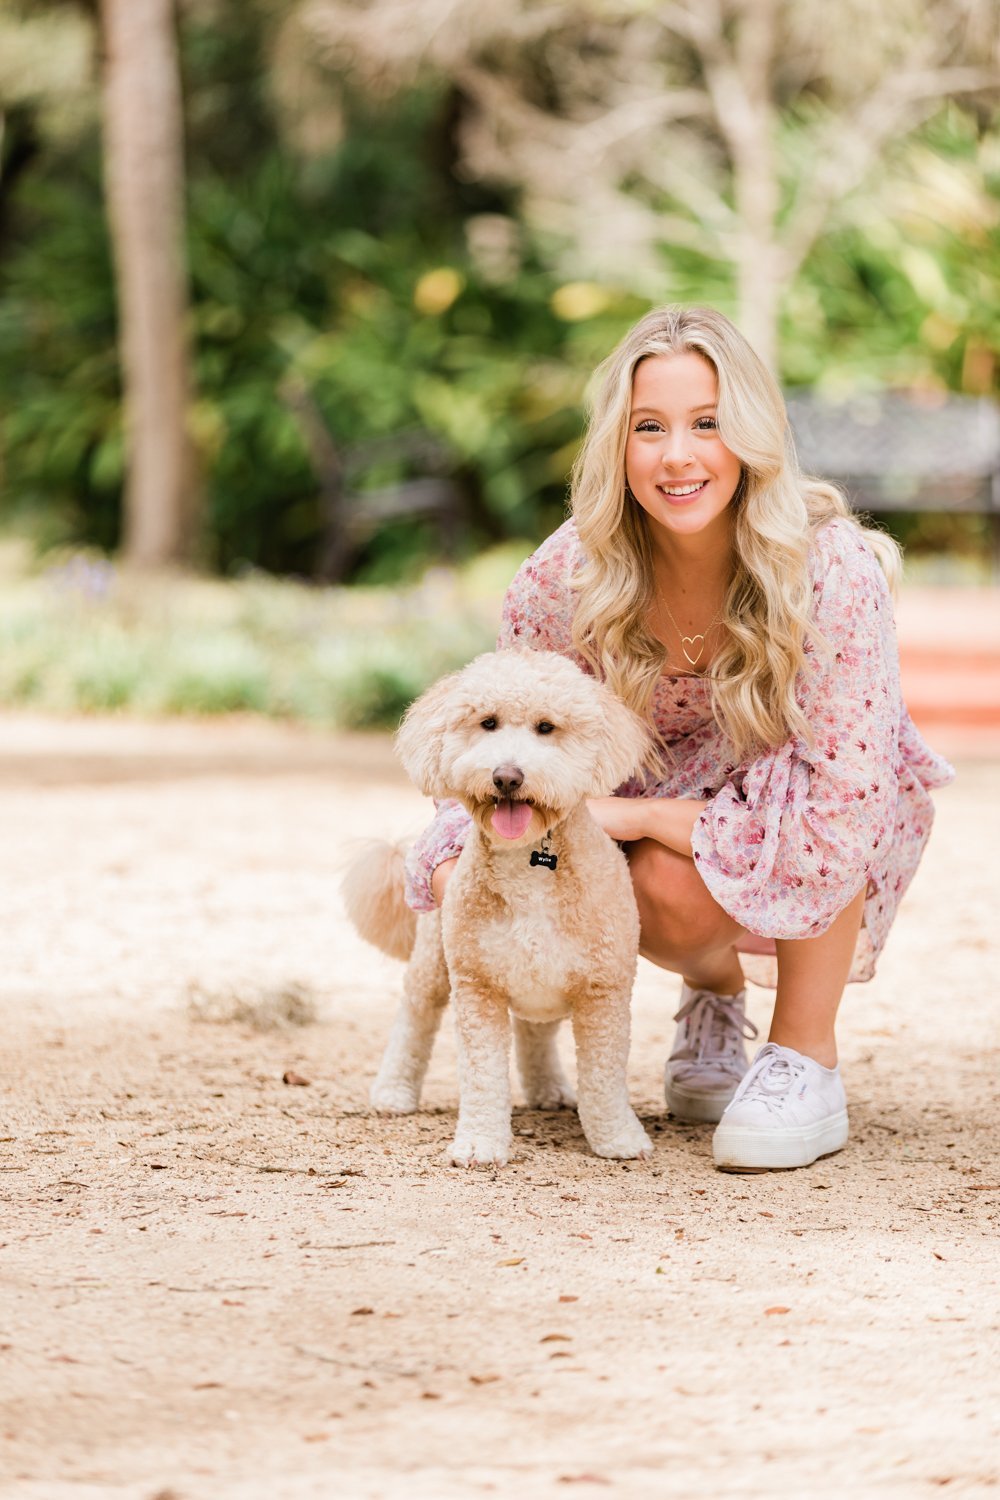 High school senior pictures with a pet in Washington Oaks Gardens